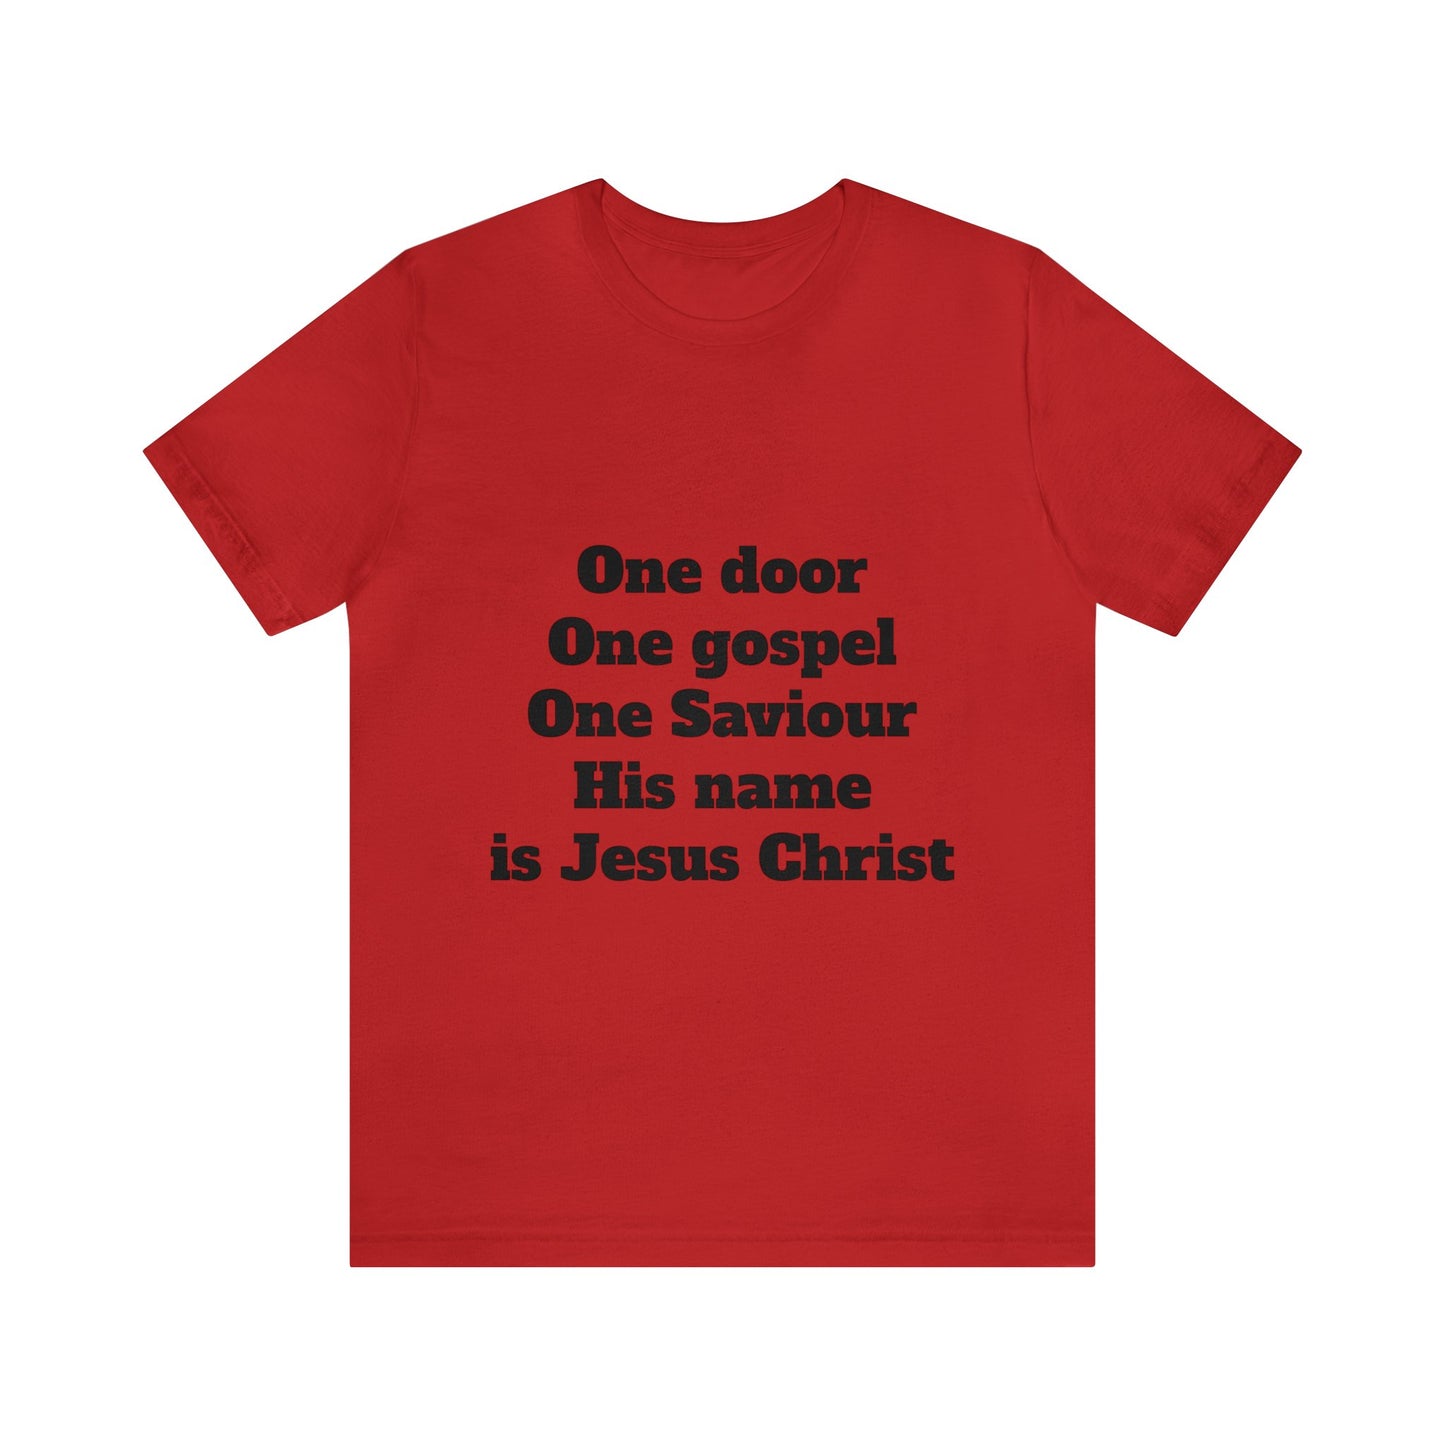 His name is Jesus Christ T-shirt (White and Red)